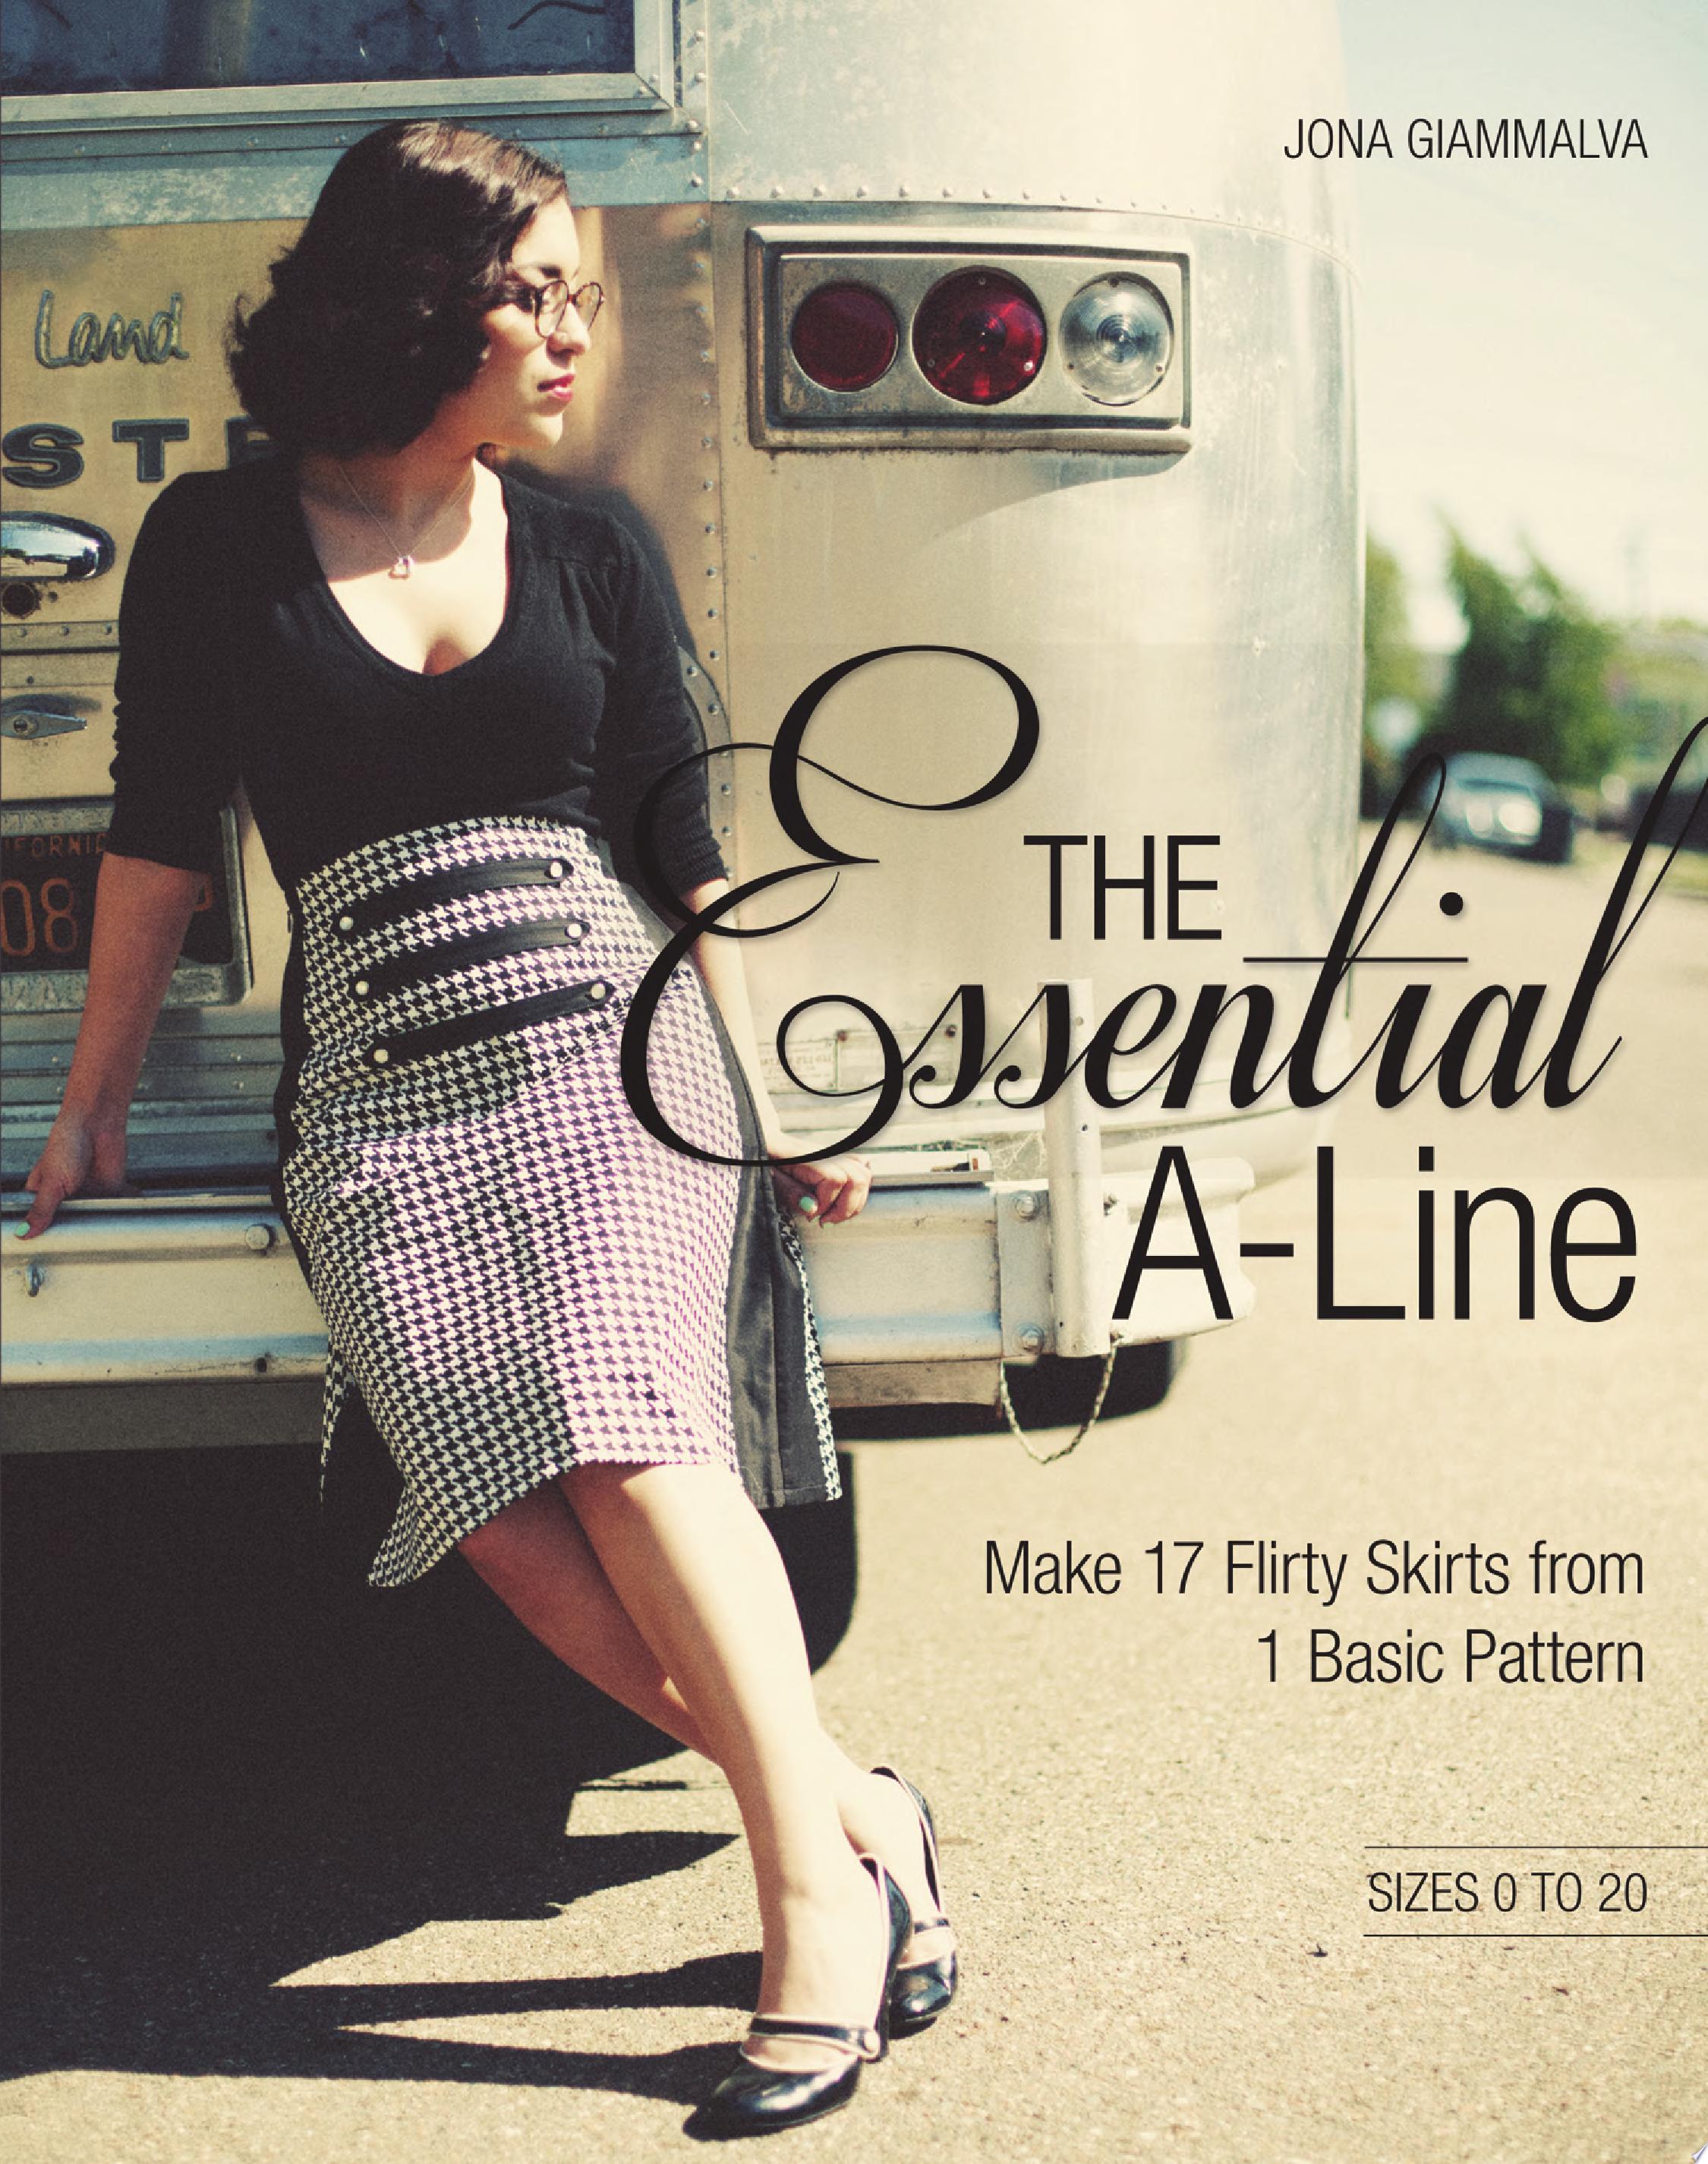 Image for "The Essential A-line"